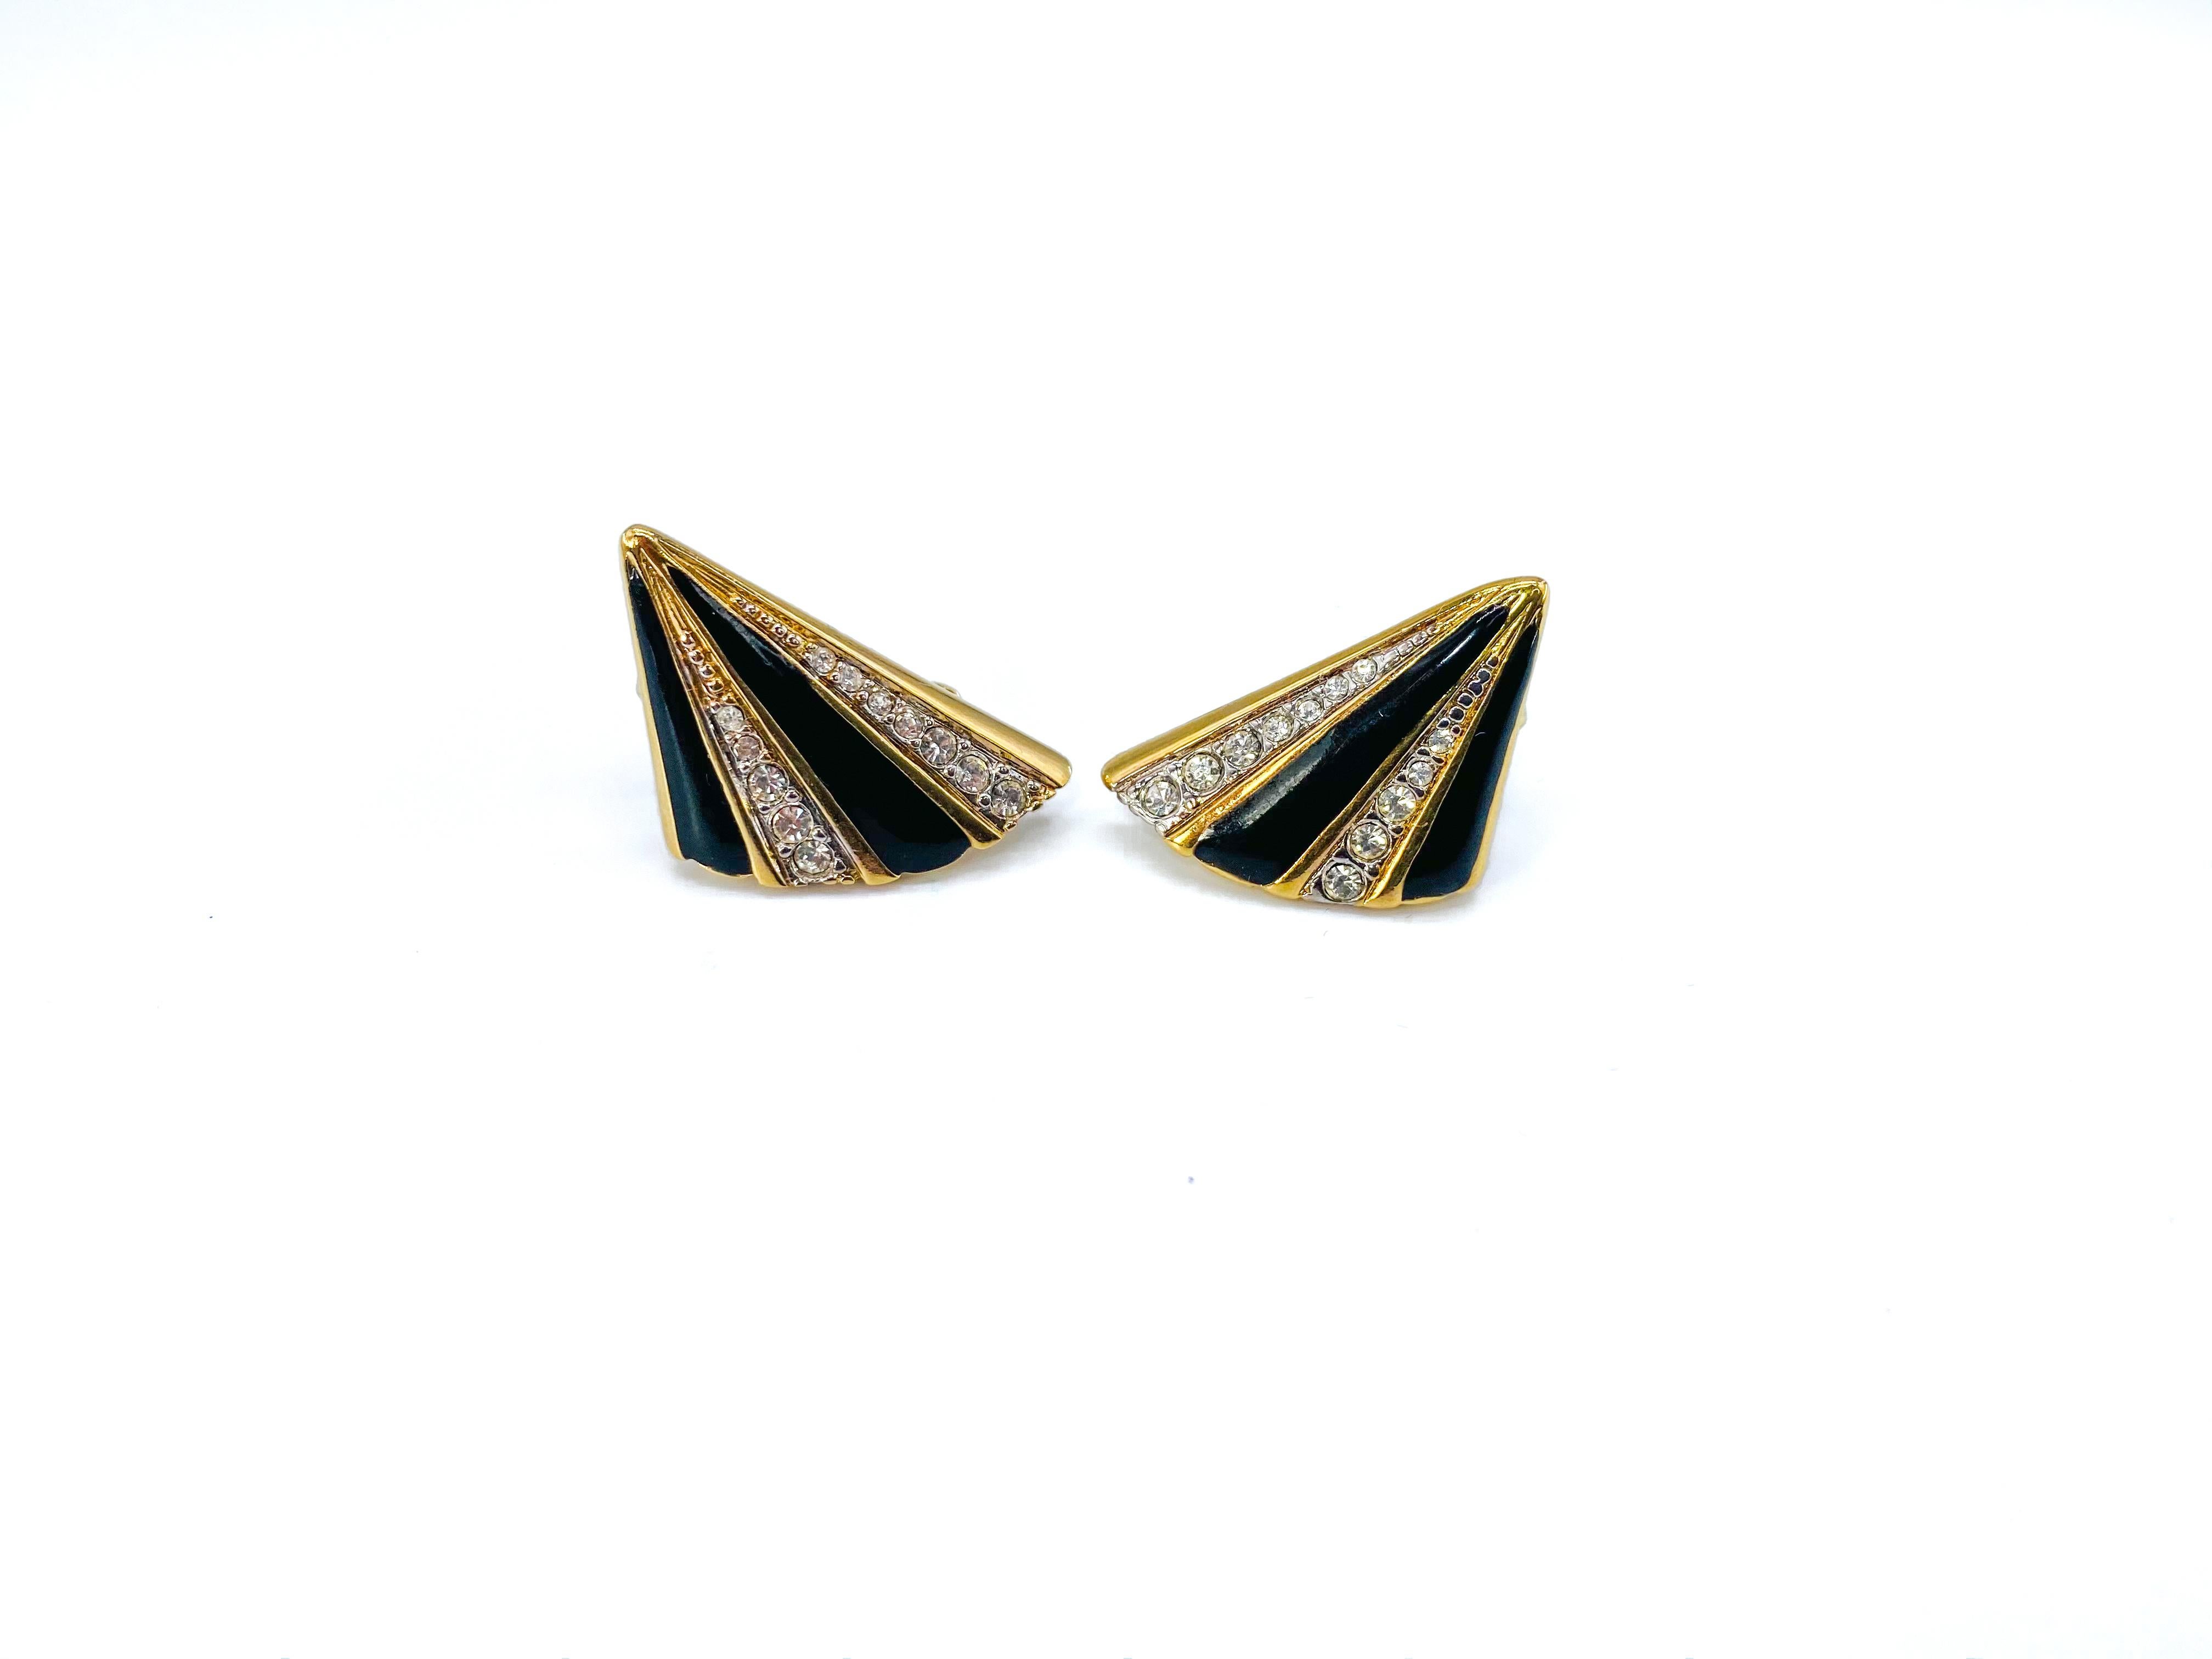 Nina Ricci Vintage 1980s Earrings for Pierced Ears

Fantastic statement 80s earrings from the House of Nina Ricci.

Detail
-Art Deco styling
-Cast from high quality gold plated metal
-Black enamel and crystal stripes

Style & Fit
-Approx 2cm / 3/4